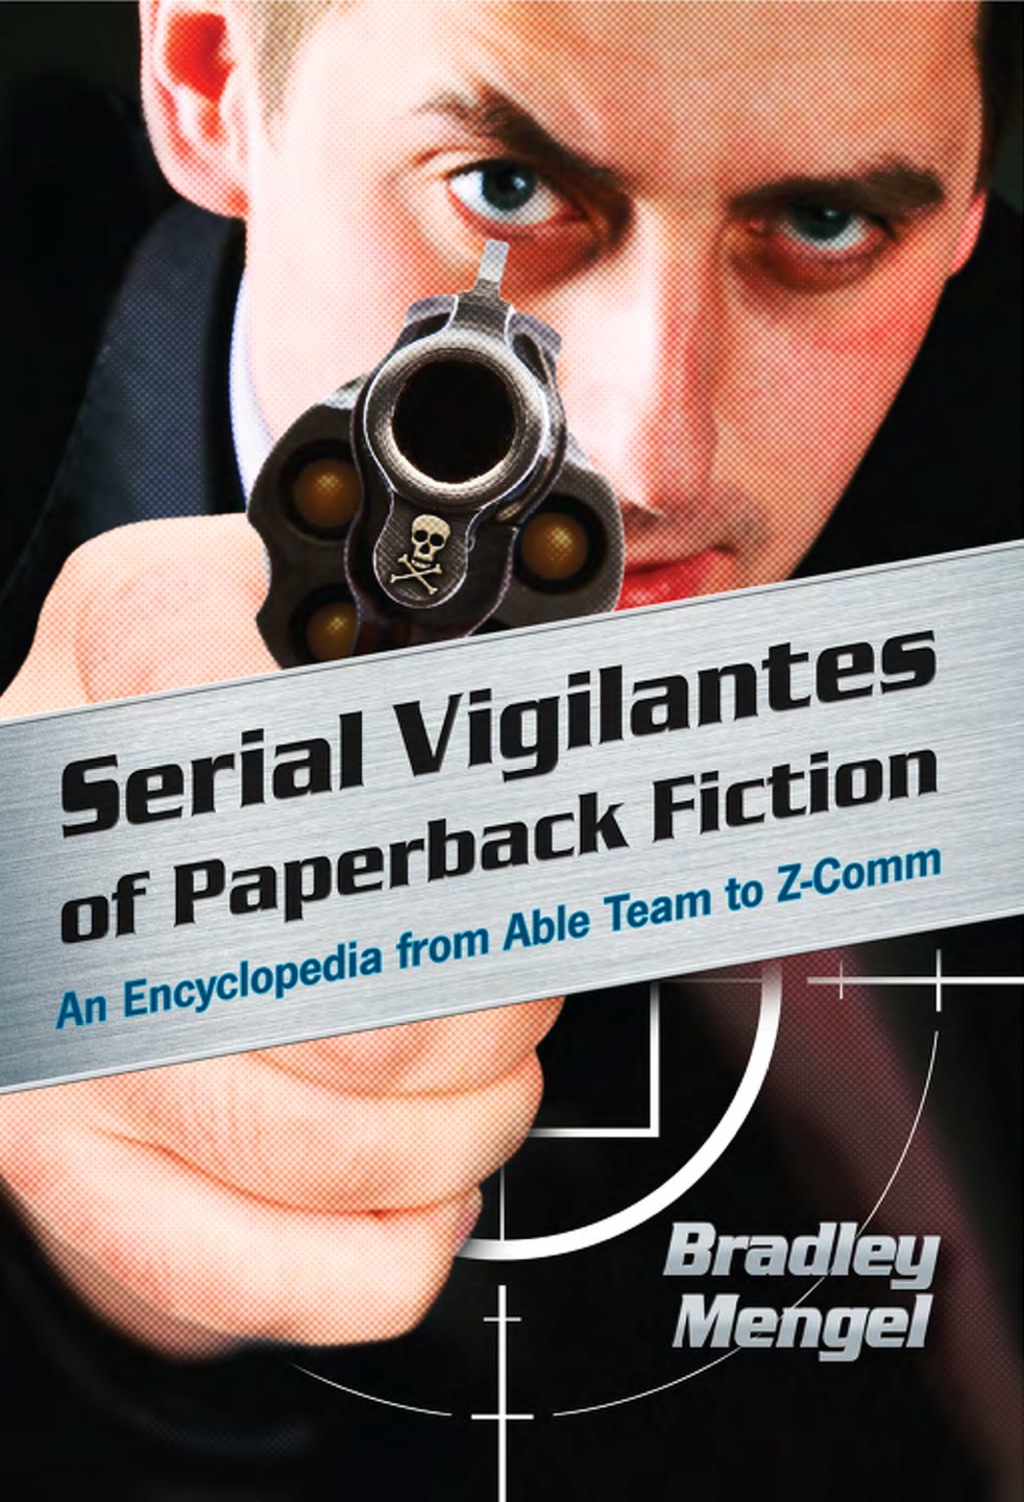 Serial Vigilantes of Paperback Fiction: An Encyclopedia from Able Team to Z-Comm (eBook) - Bradley Mengel,